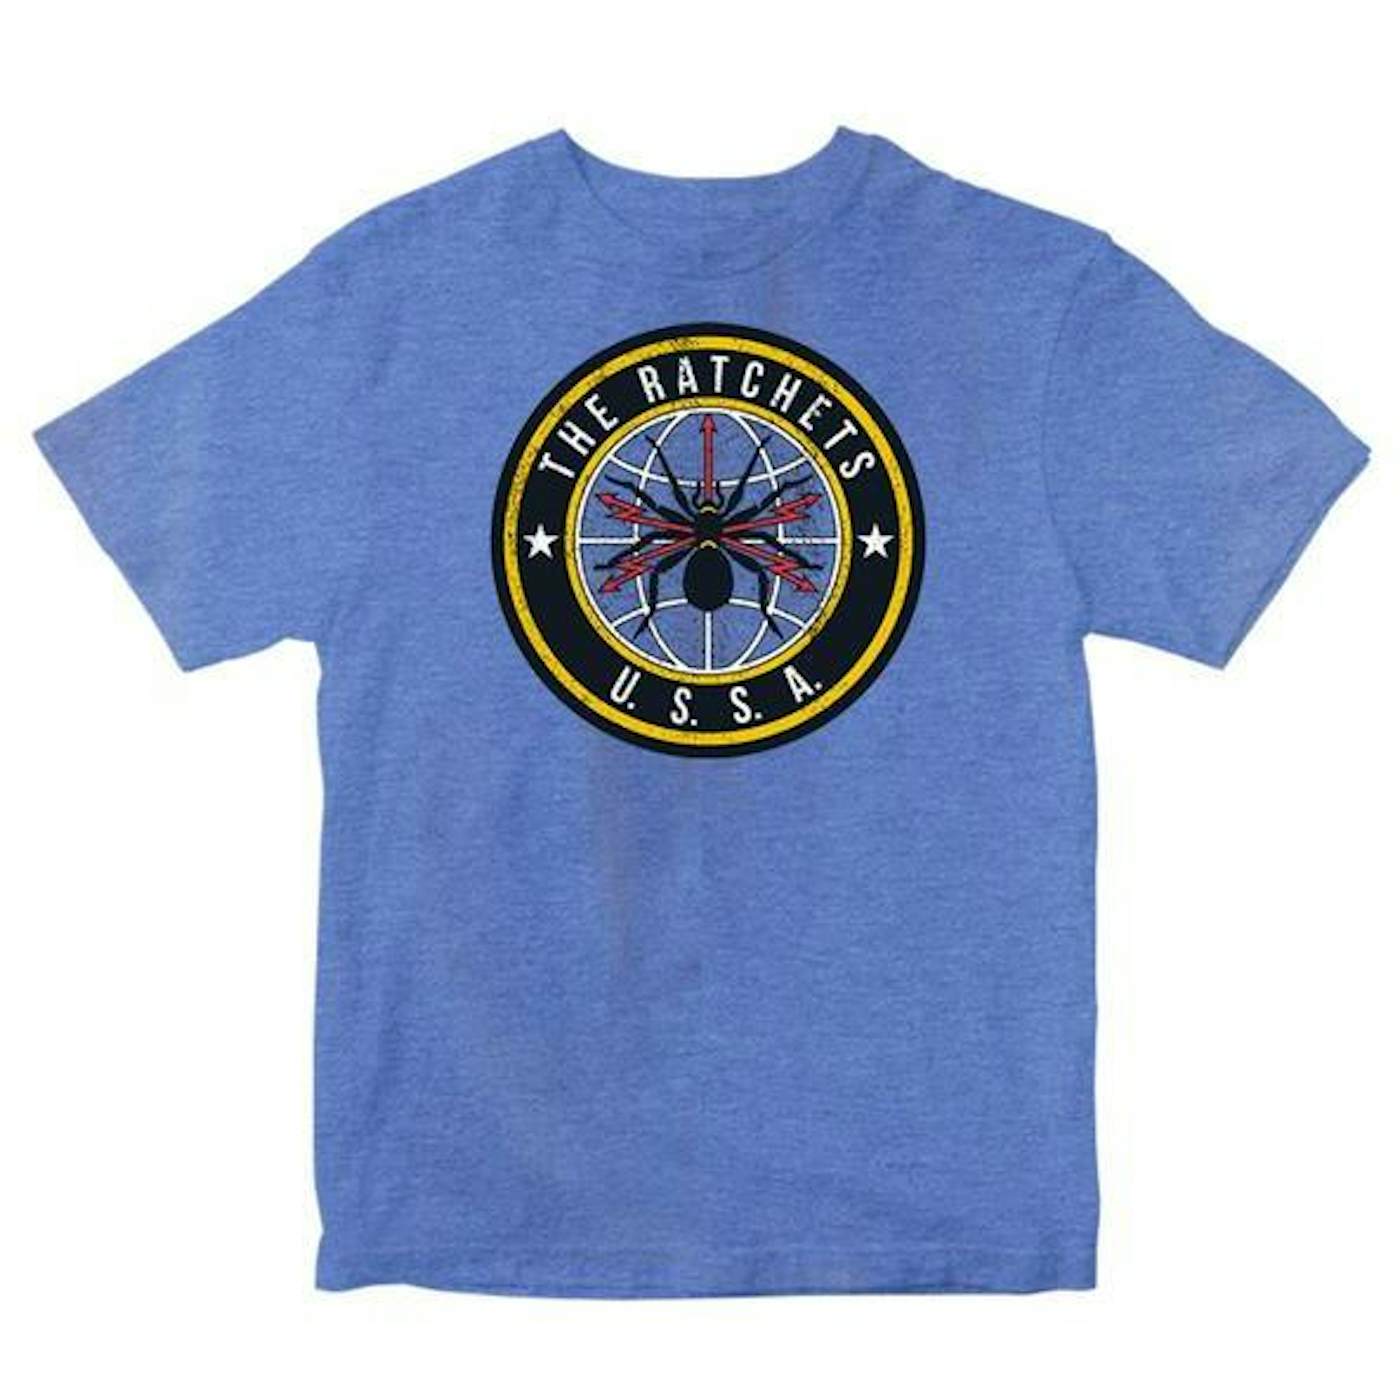 The Ratchets - Spider - Blue - T-Shirt